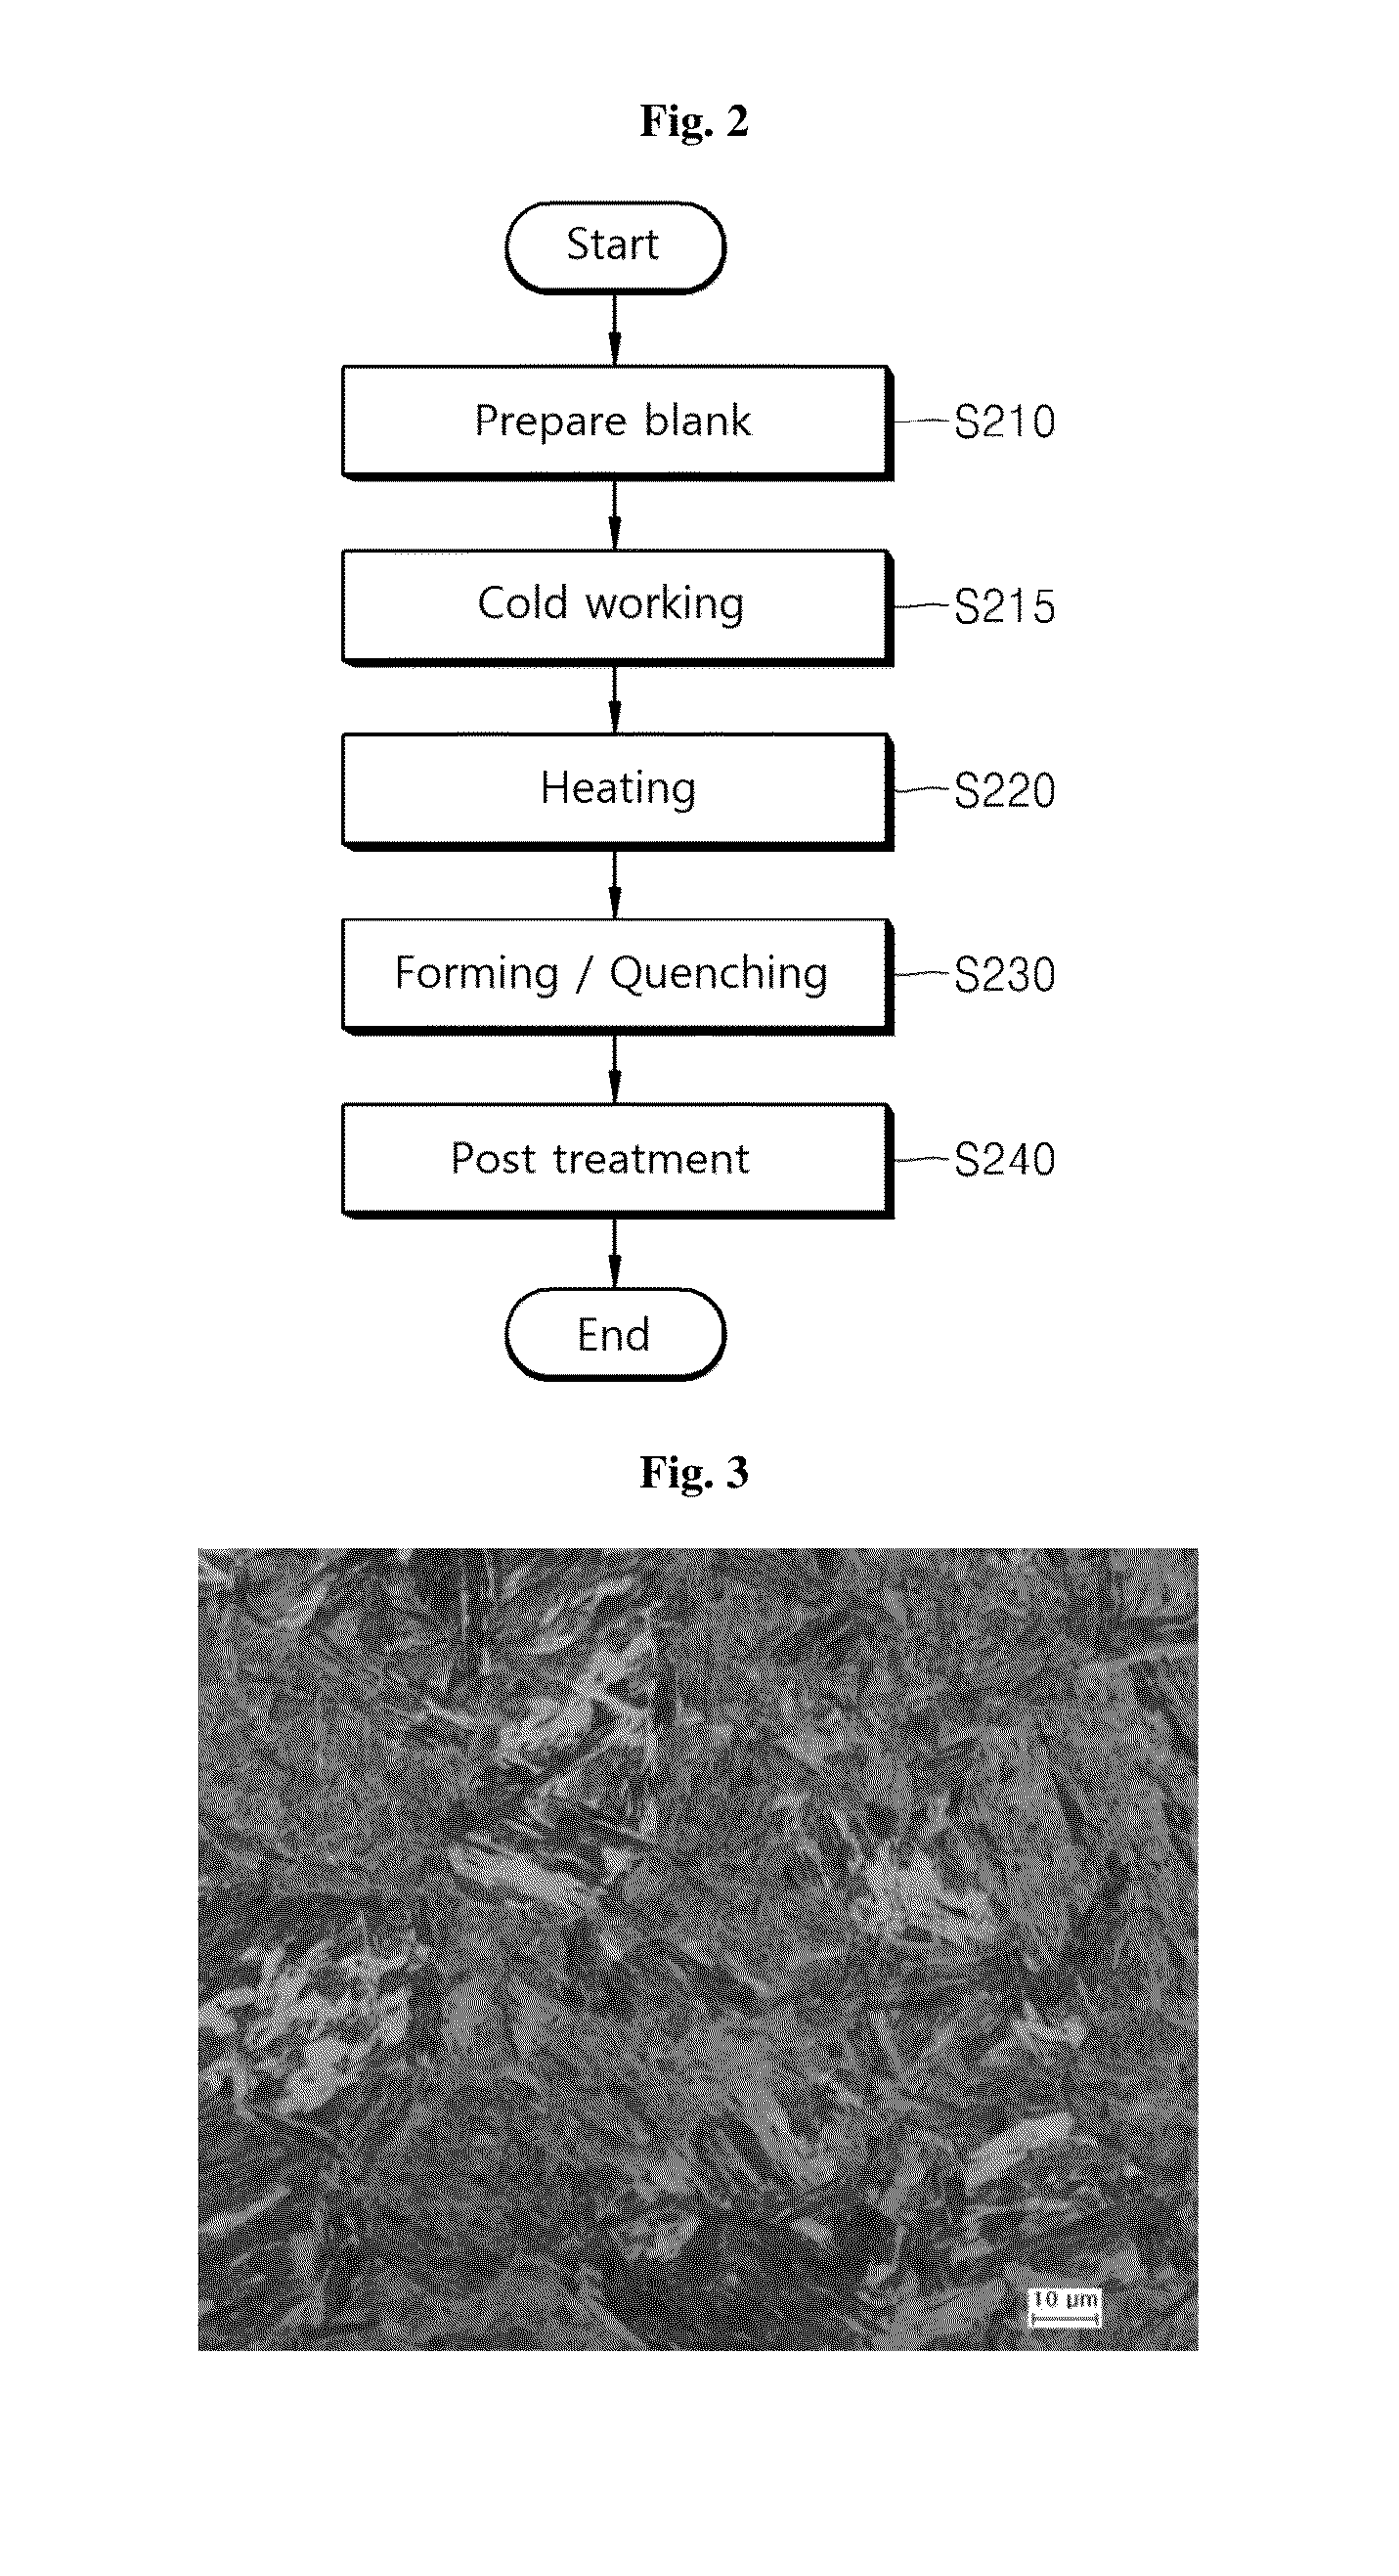 Heat-hardened steel with excellent crashworthiness and method for manufacturing heat-hardenable parts using same